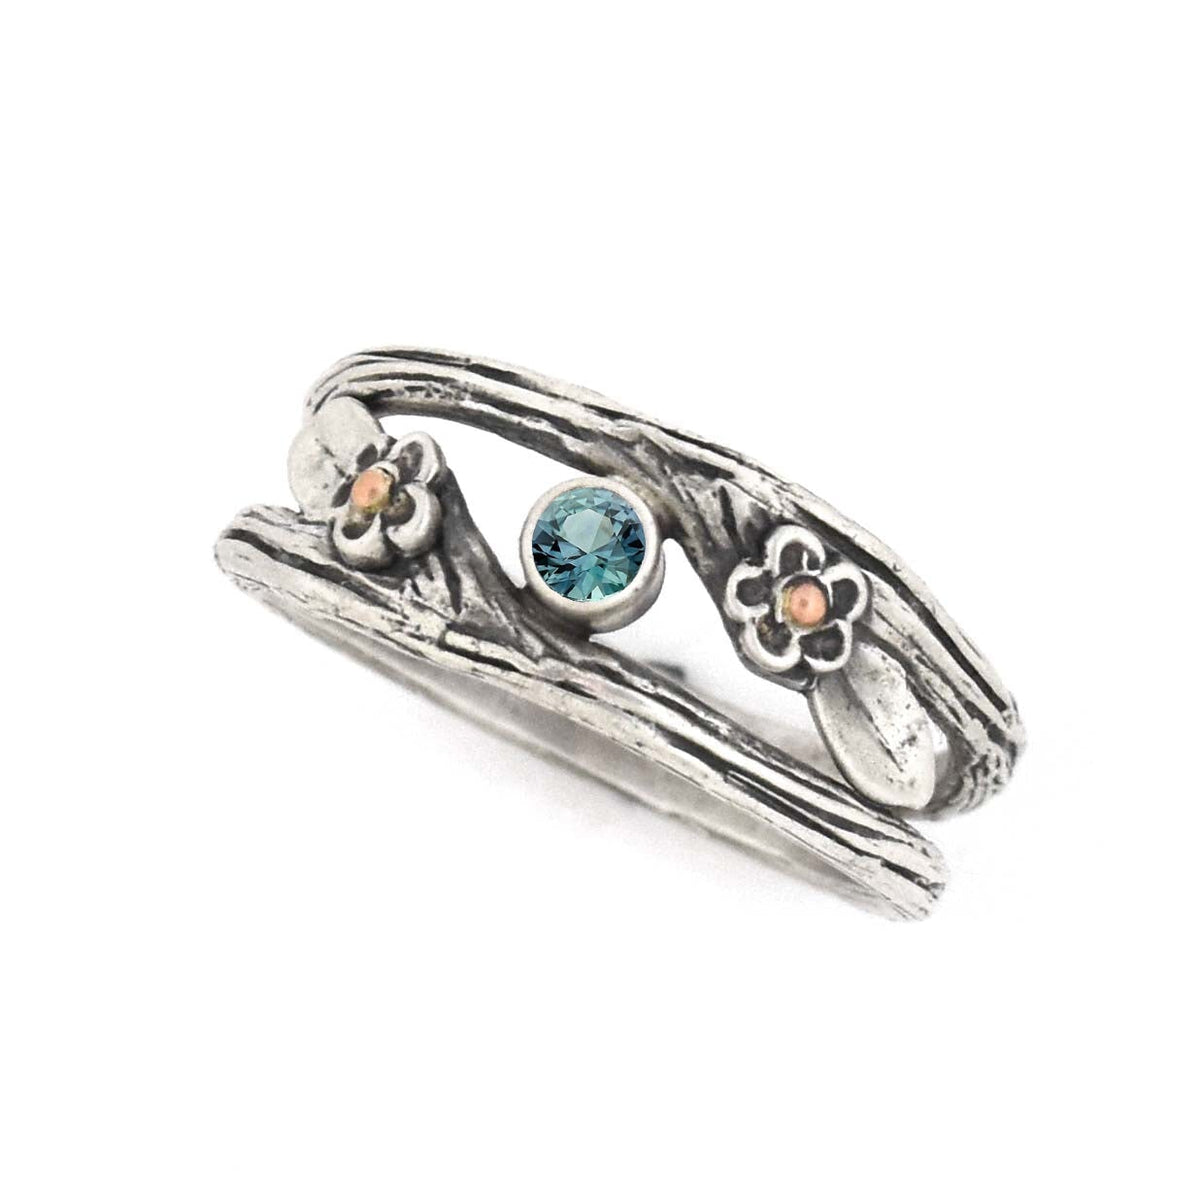 Blossoming Romance Twig Ring - your choice of stone - Wedding Ring Teal Montana Sapphire Green Montana Sapphire 4234 - handmade by Beth Millner Jewelry